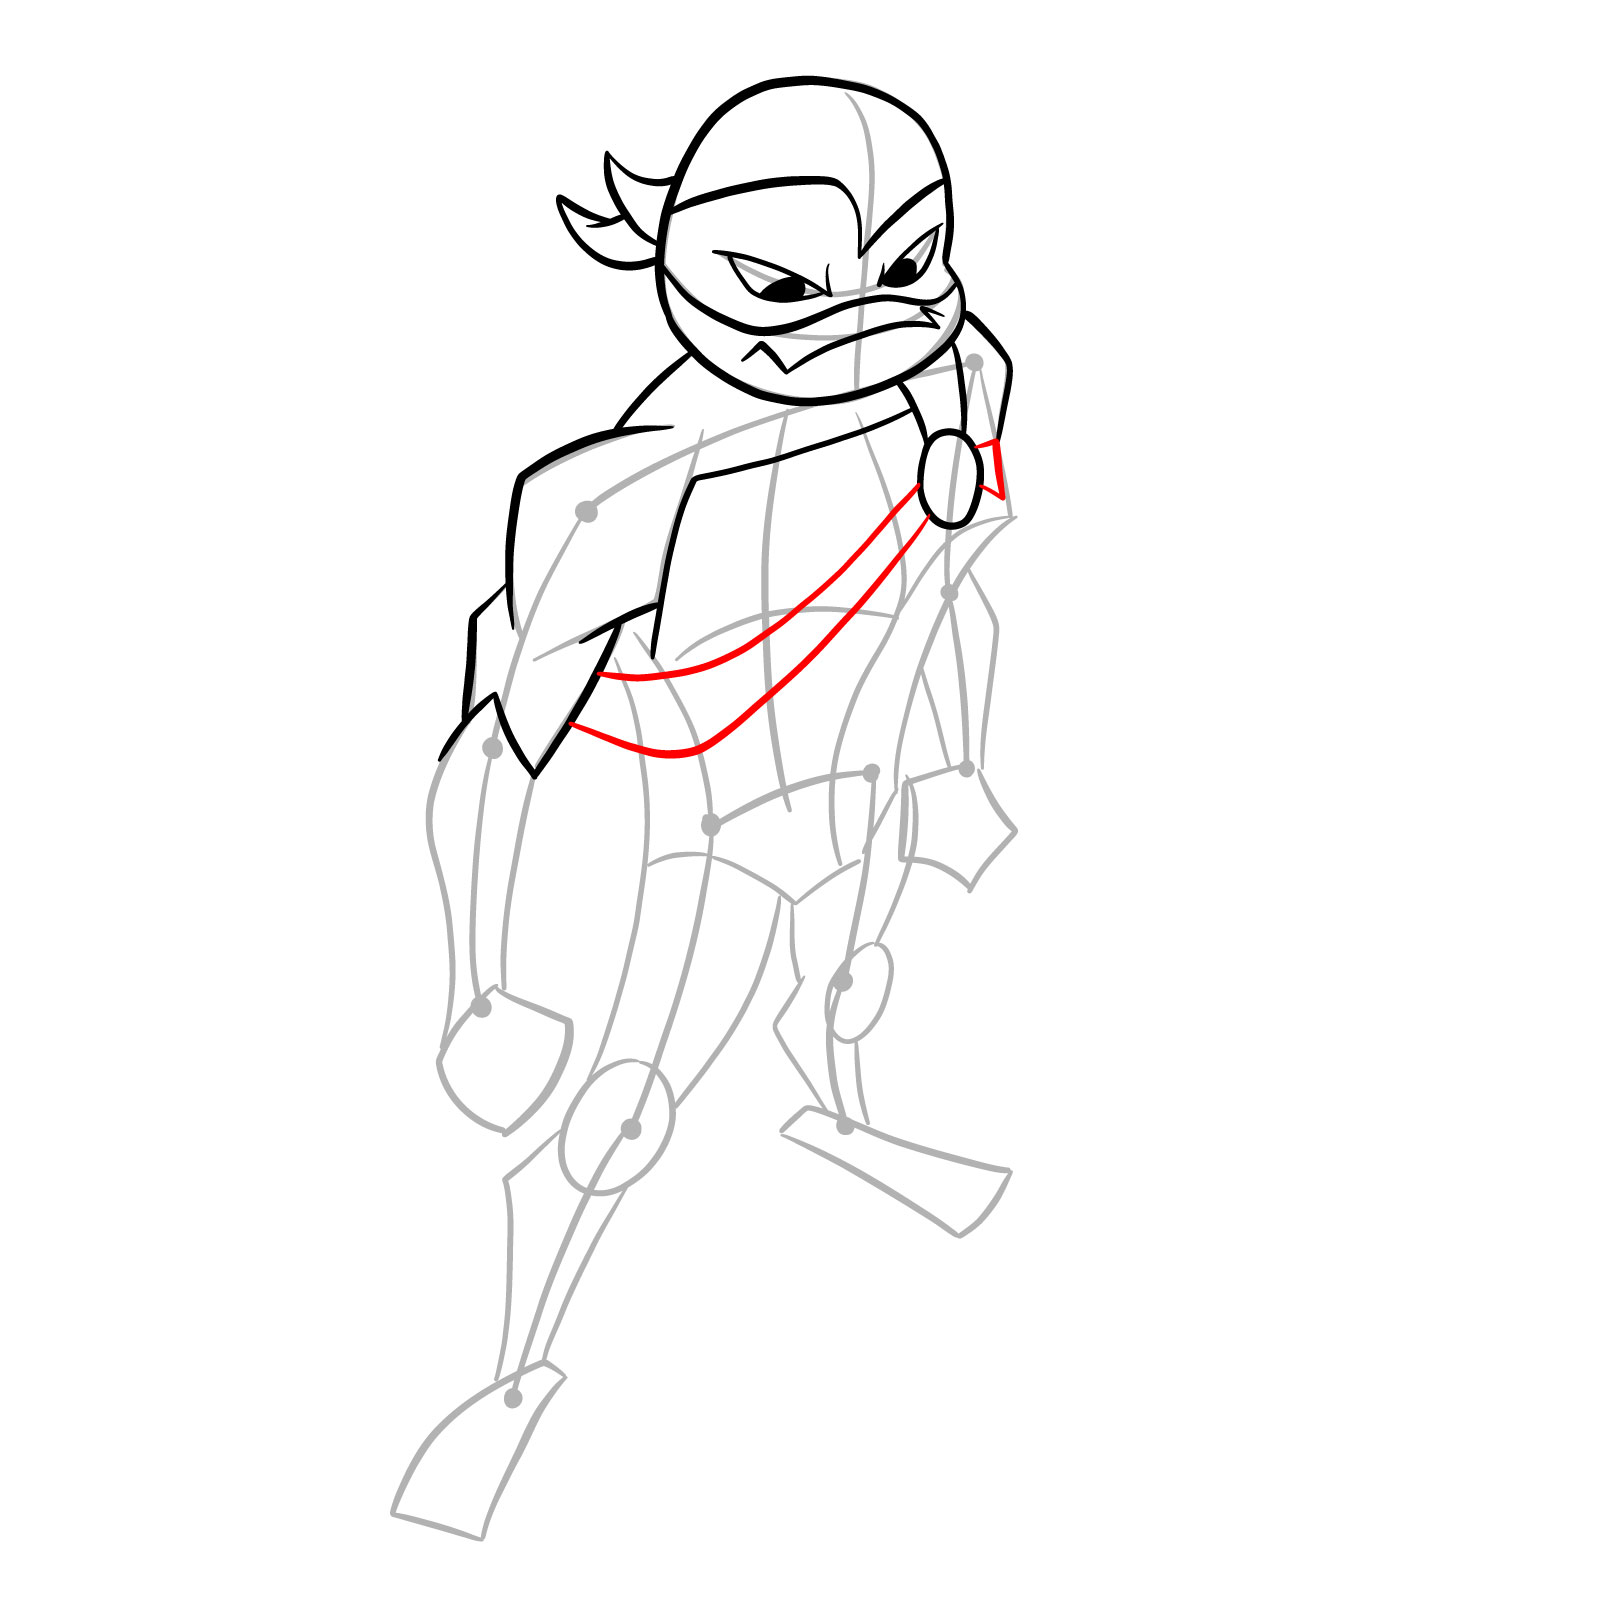 How to draw Mikey in Hamato Ninpō state - step 12